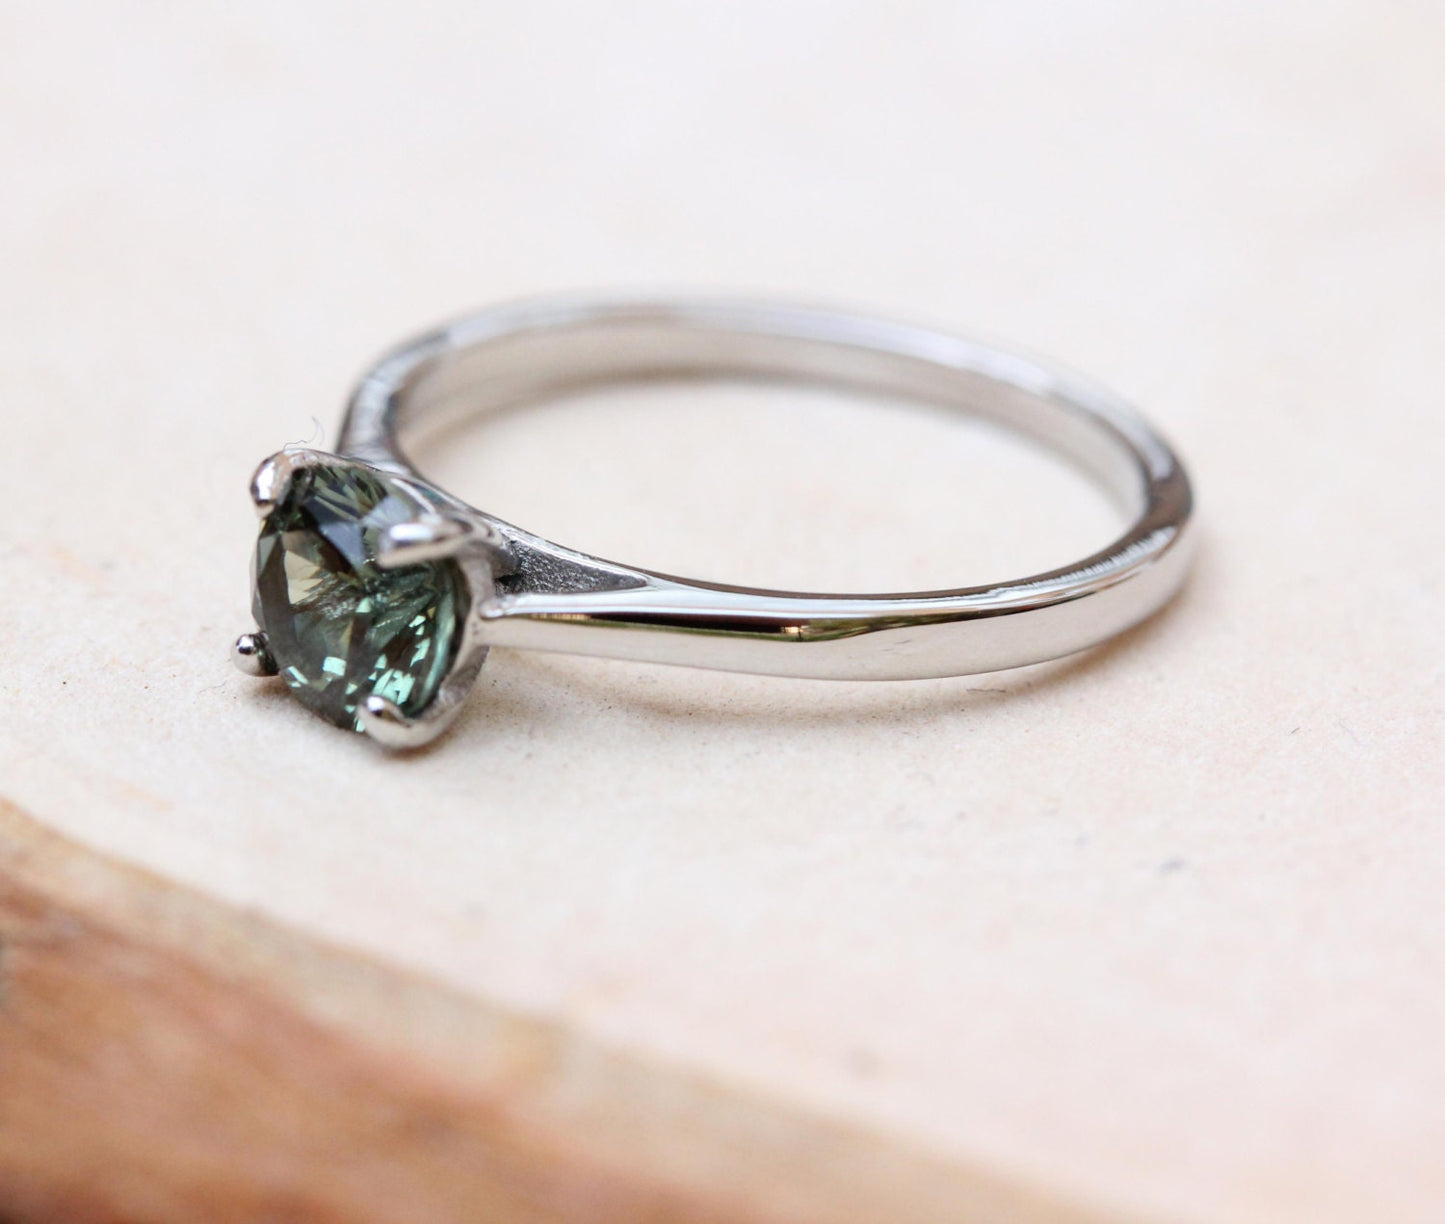 1ct Genuine Green Sapphire solitaire cathedral ring in Titanium or White Gold - engagement ring - wedding ring - handmade ring